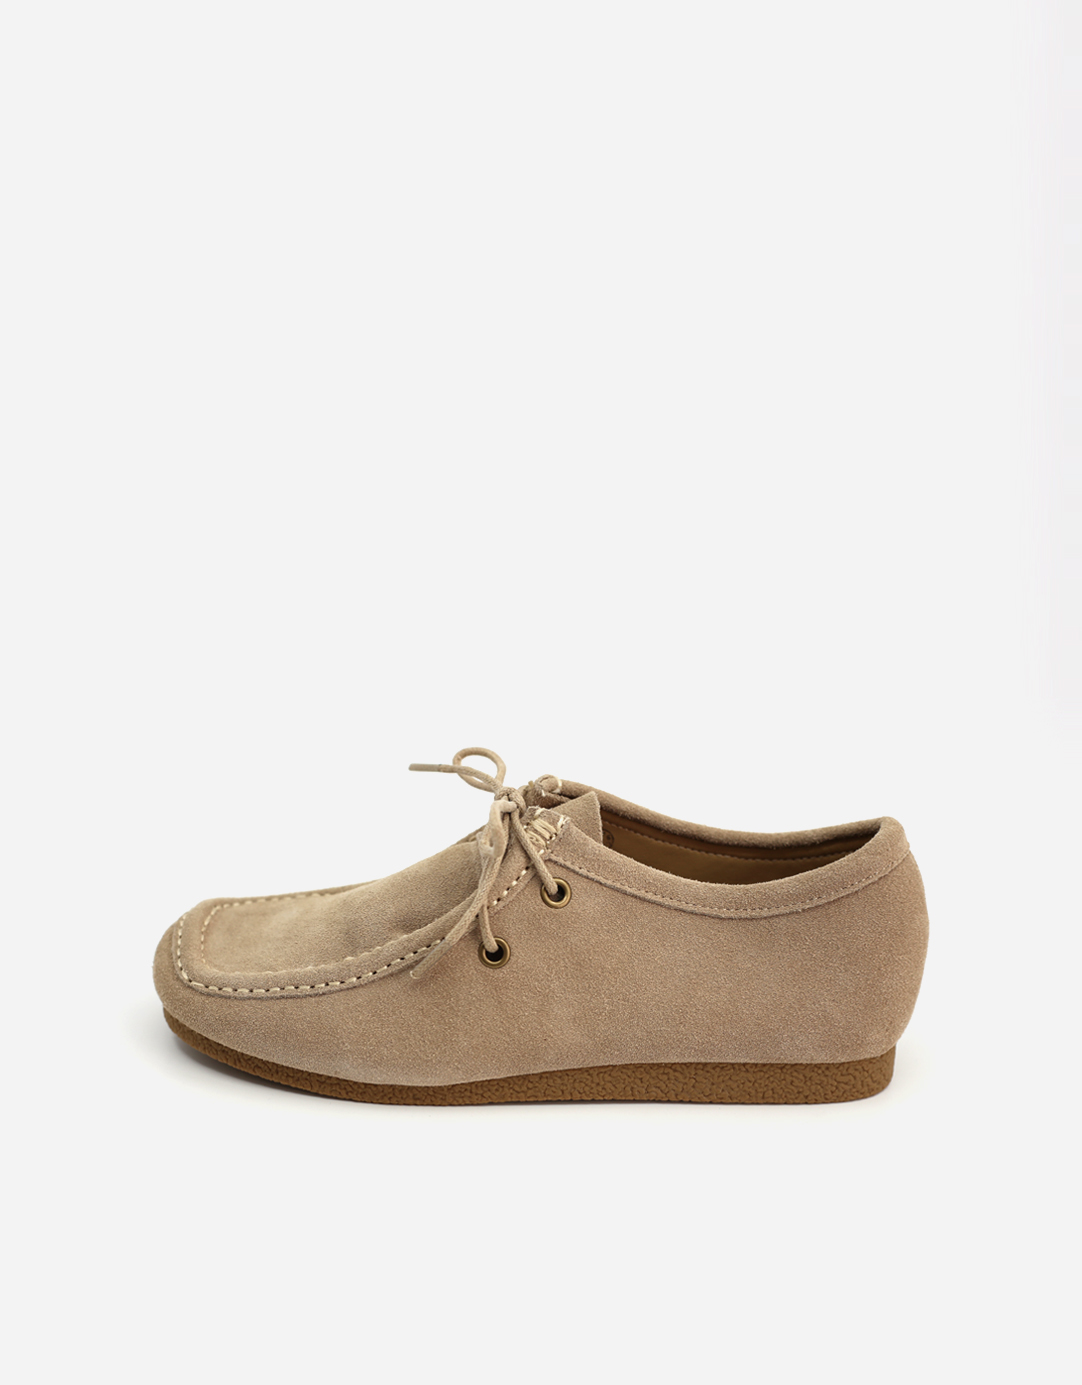 SUEDE BEIGE WALLABY LOAFER